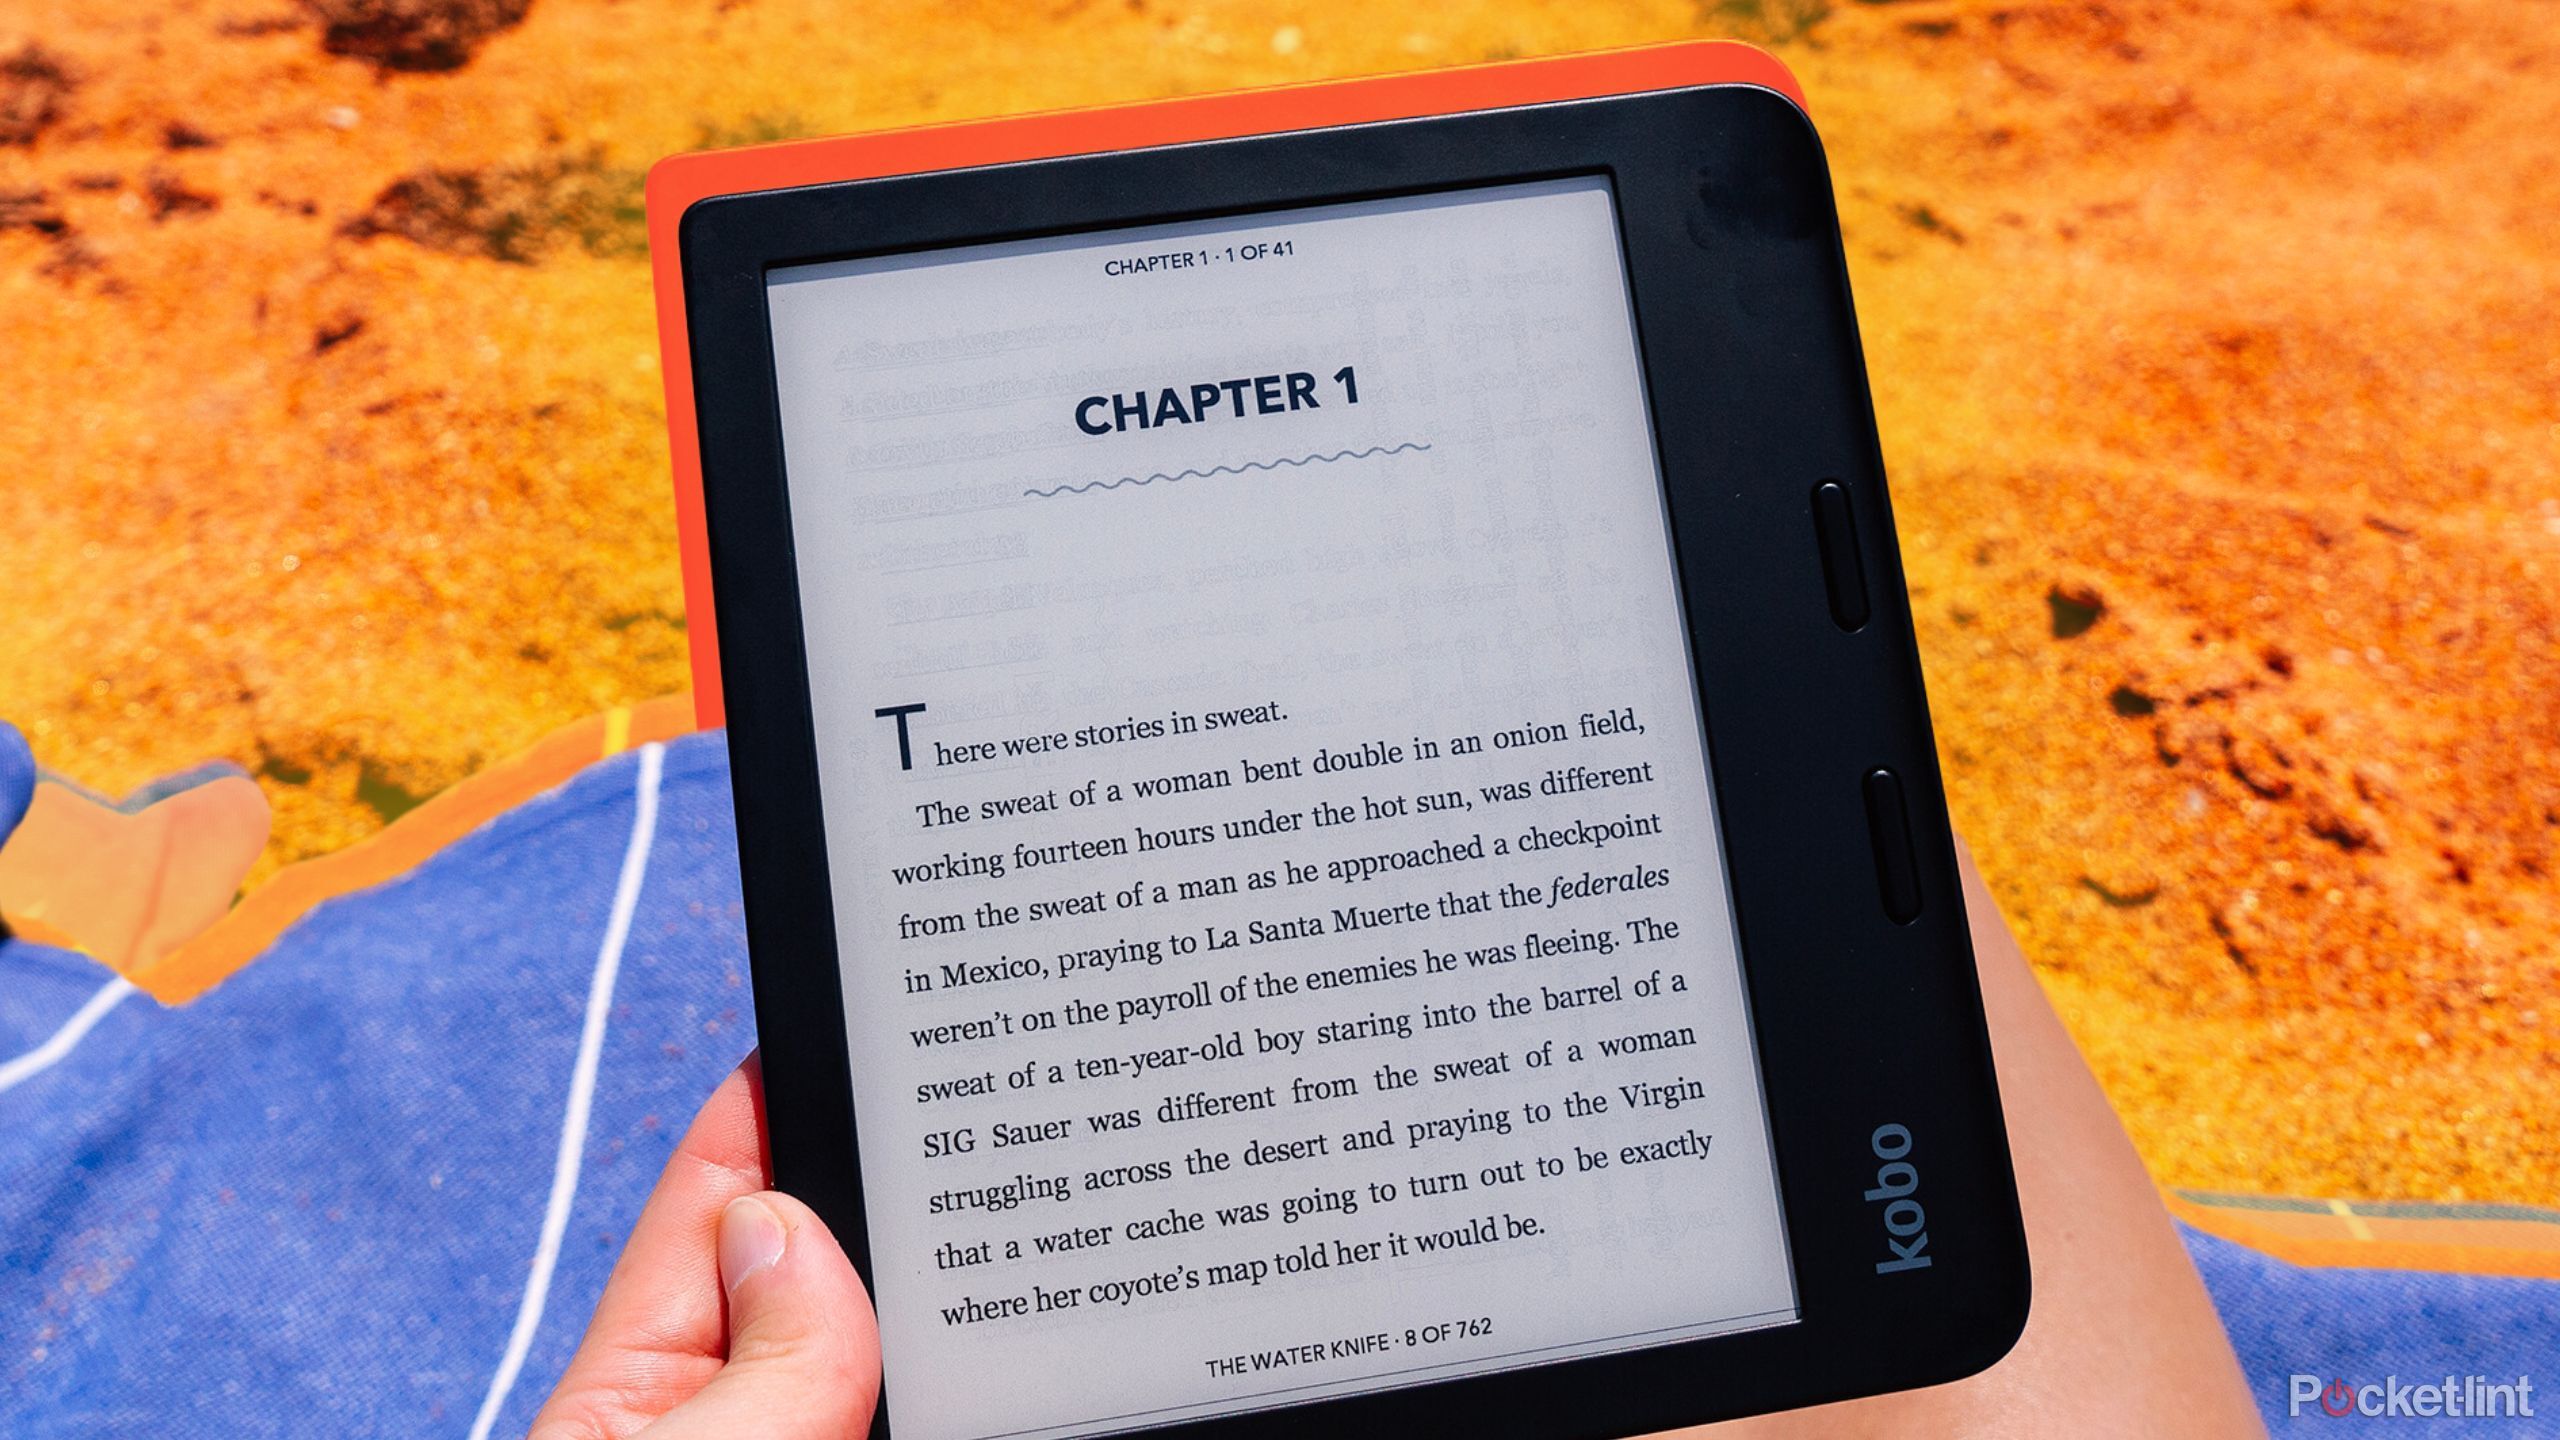 A hand holds the Kobo Libra 2 in front of a blue beach blanket on orange sand. 